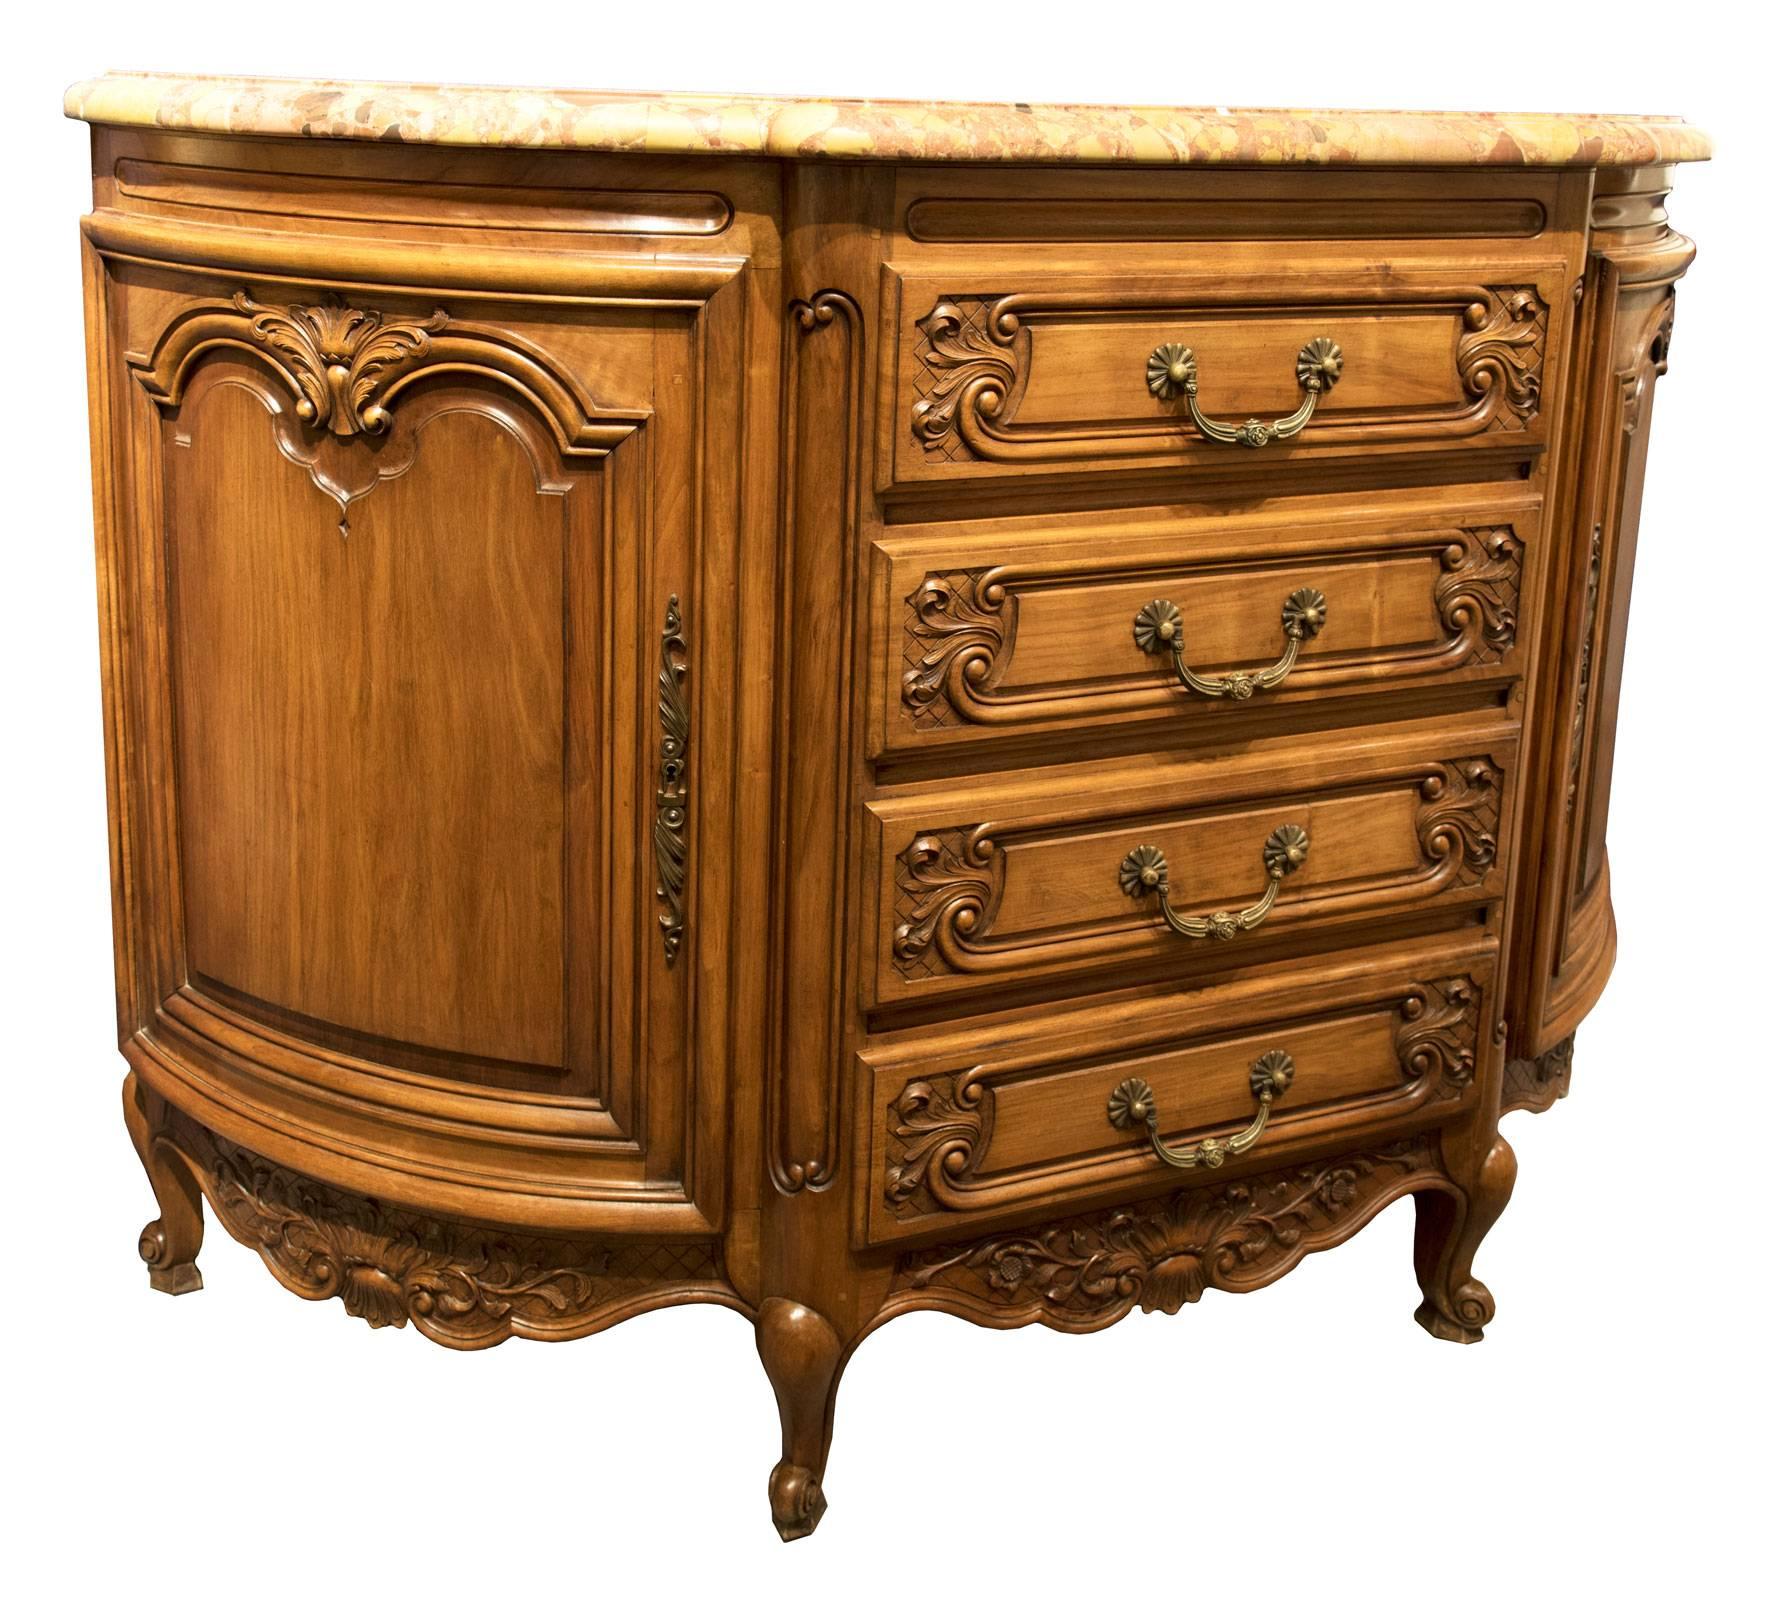 Regency Walnut Demilune Marble-Top Chest of Drawers